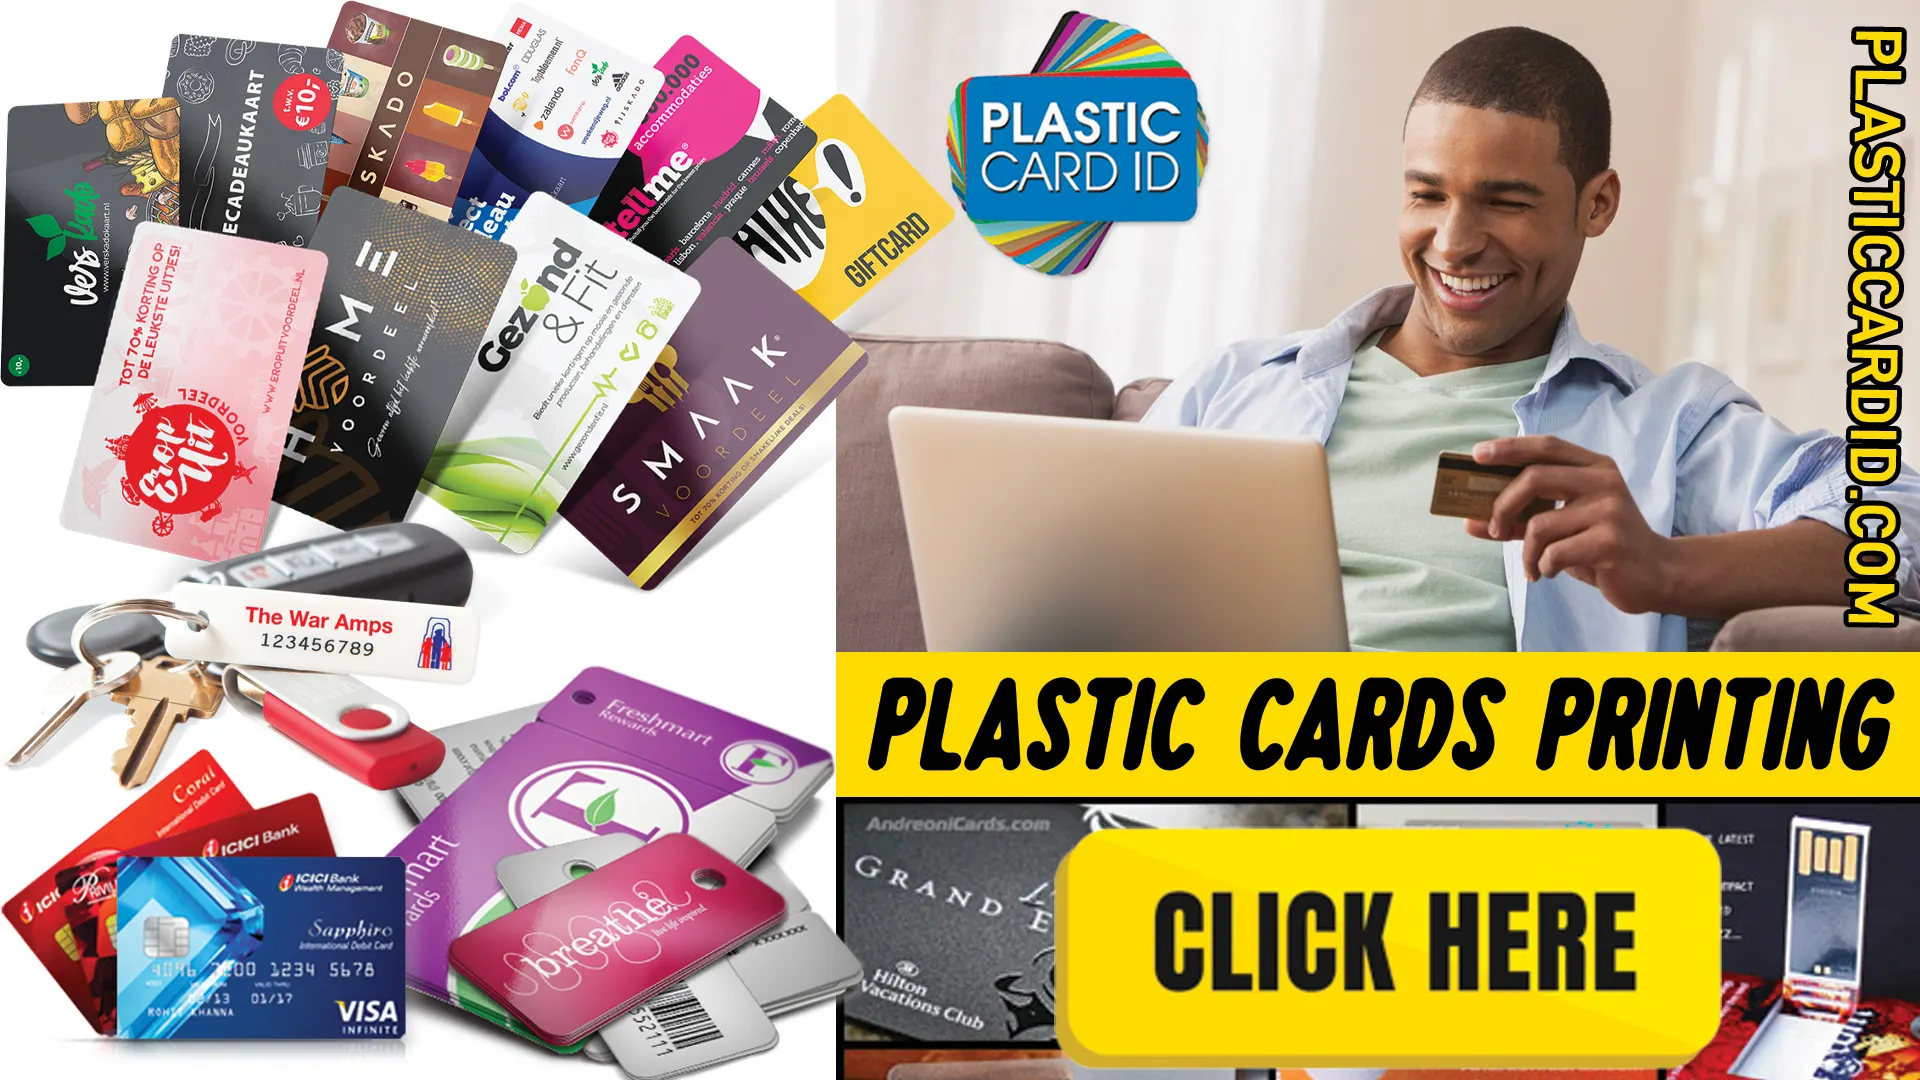 Comprehensive Selection of Card Printers and Supplies